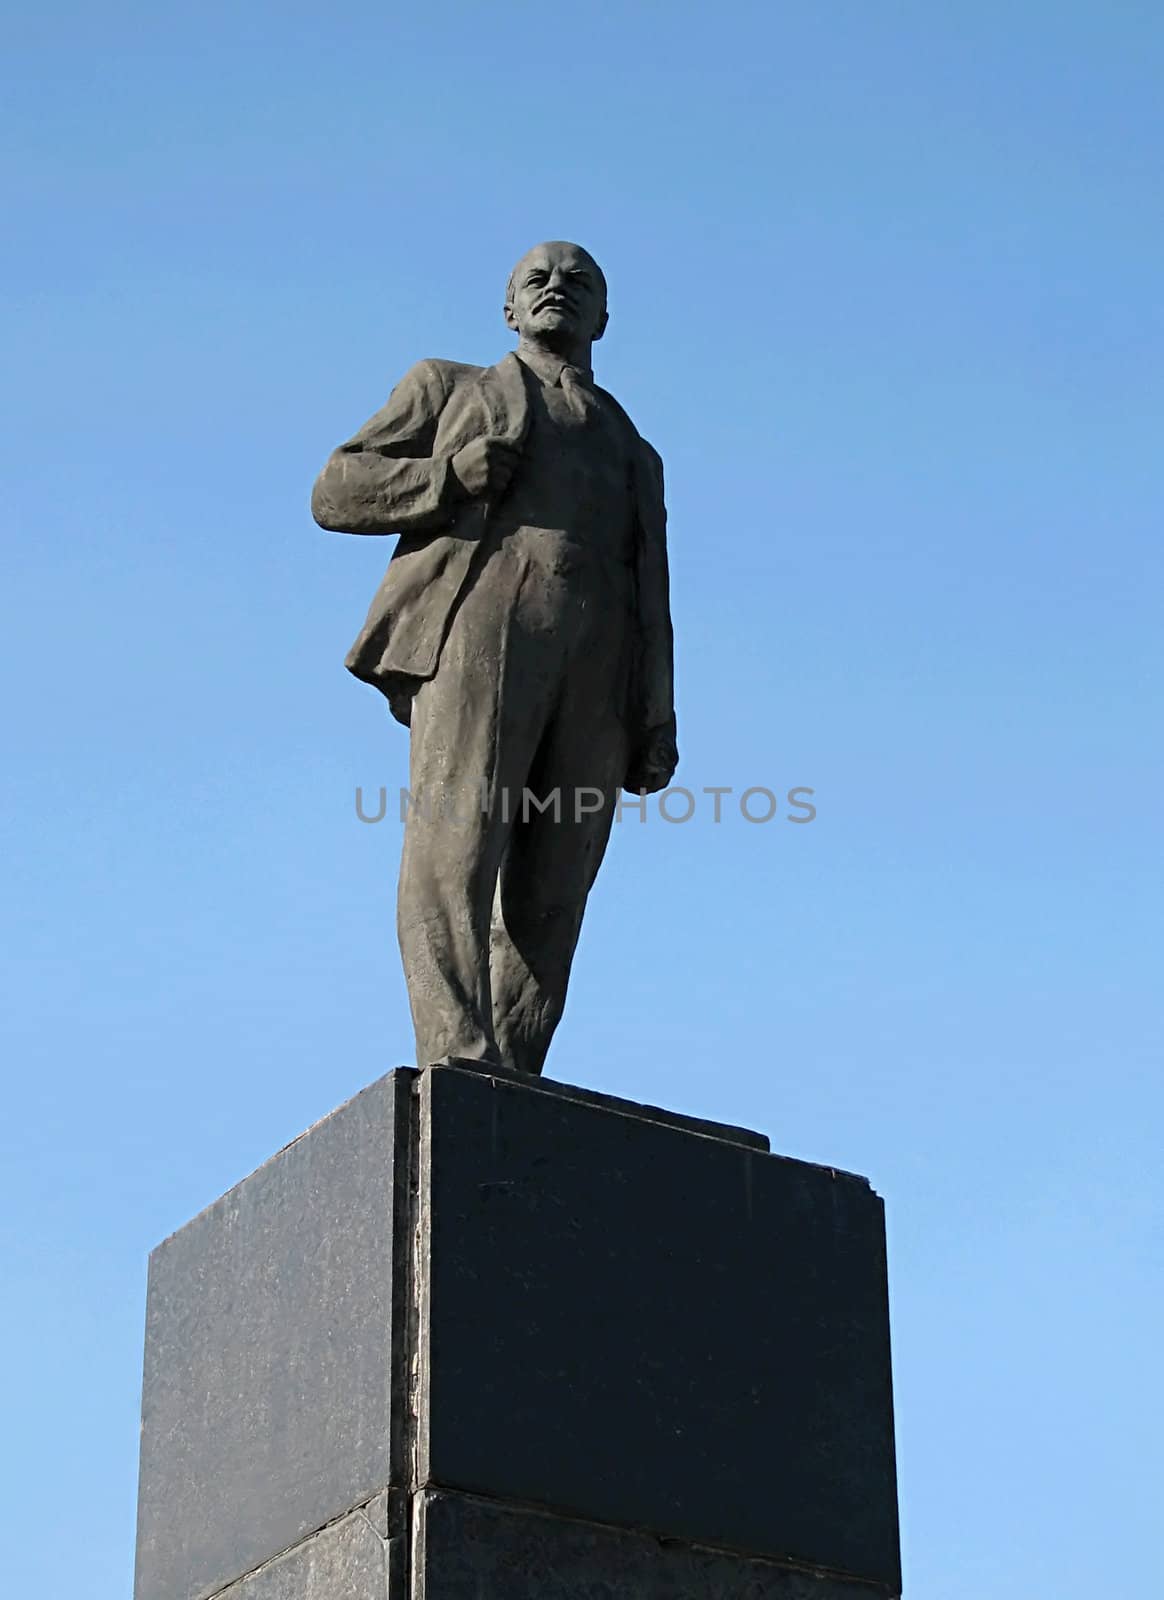 Lenin's monument in a Russian provincial town